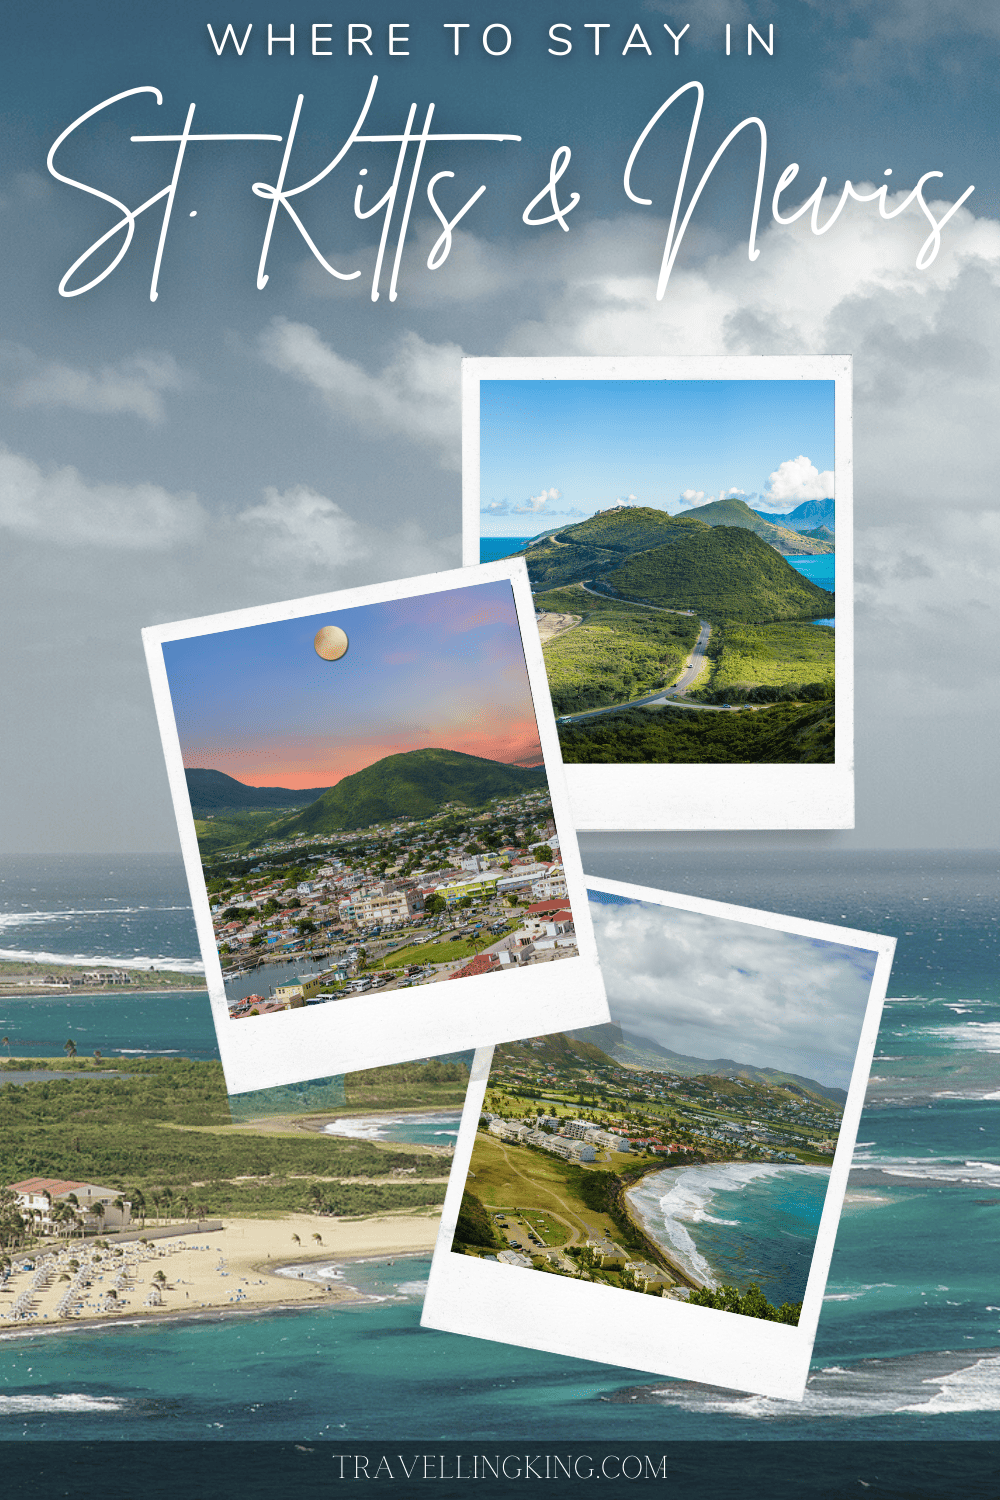 Where to stay in St. Kitts & Nevis